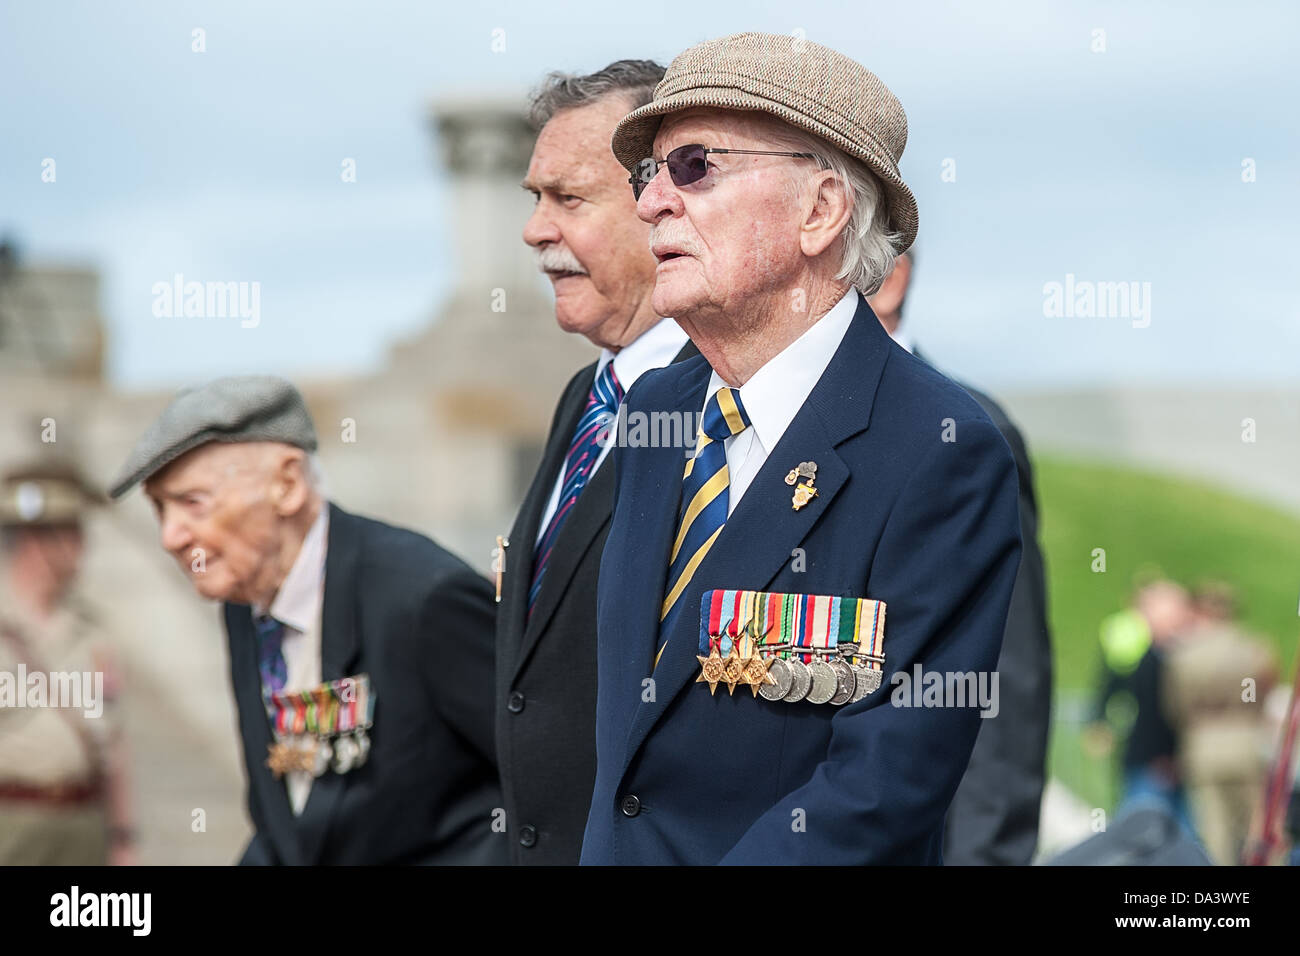 Football Legend Ron Barassi's first Anzac Day march in Melbourne Australia honoring the military service of his father in WWII. Stock Photo